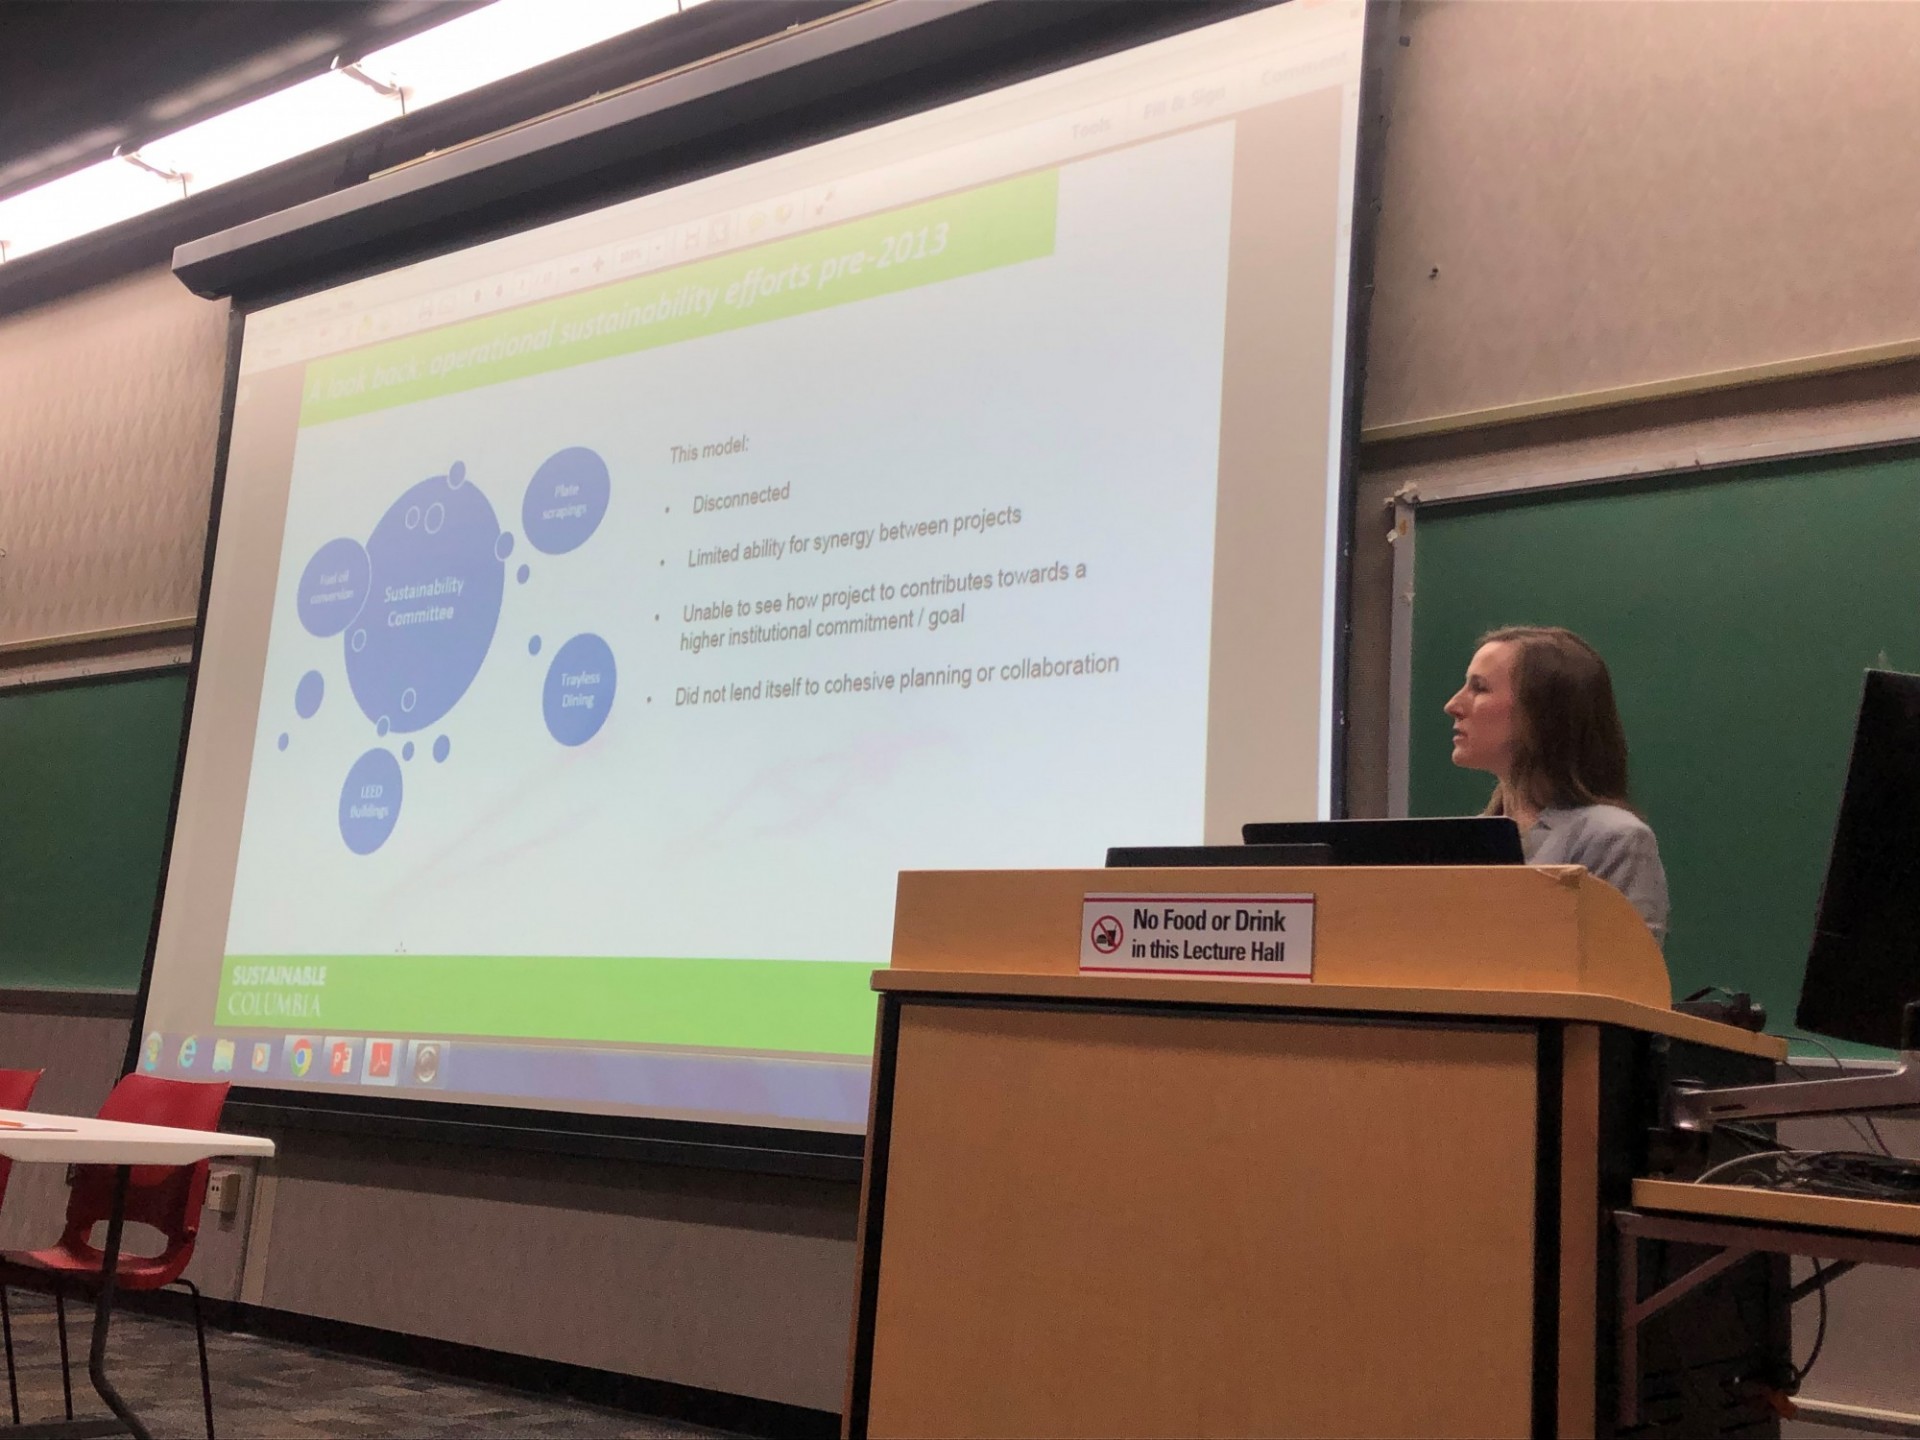 Jessica Prata, Assistant Vice President of the Office of Sustainability at Columbia addressed ways to set sustainability goals for universities.